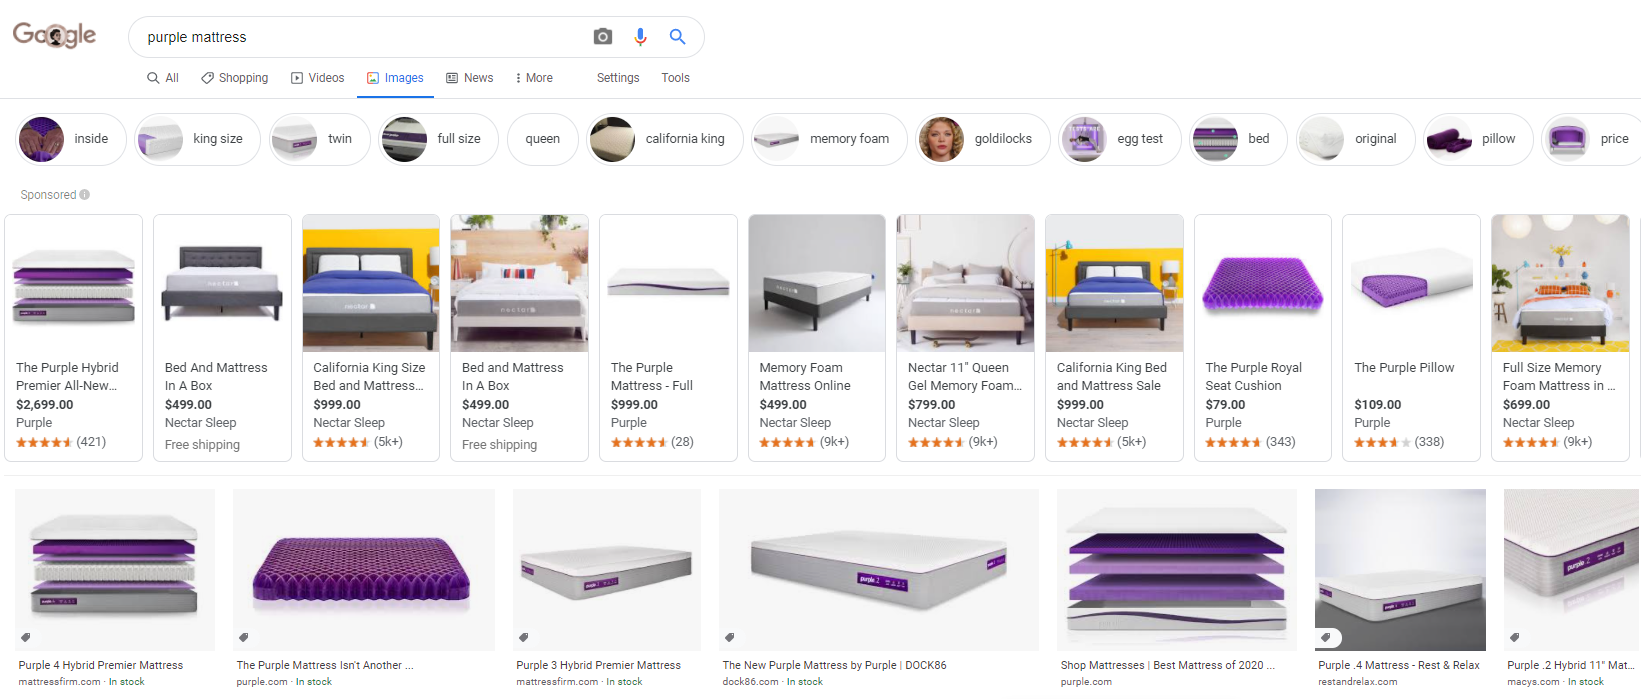 Example of Google Shopping ads appearing in Google Images